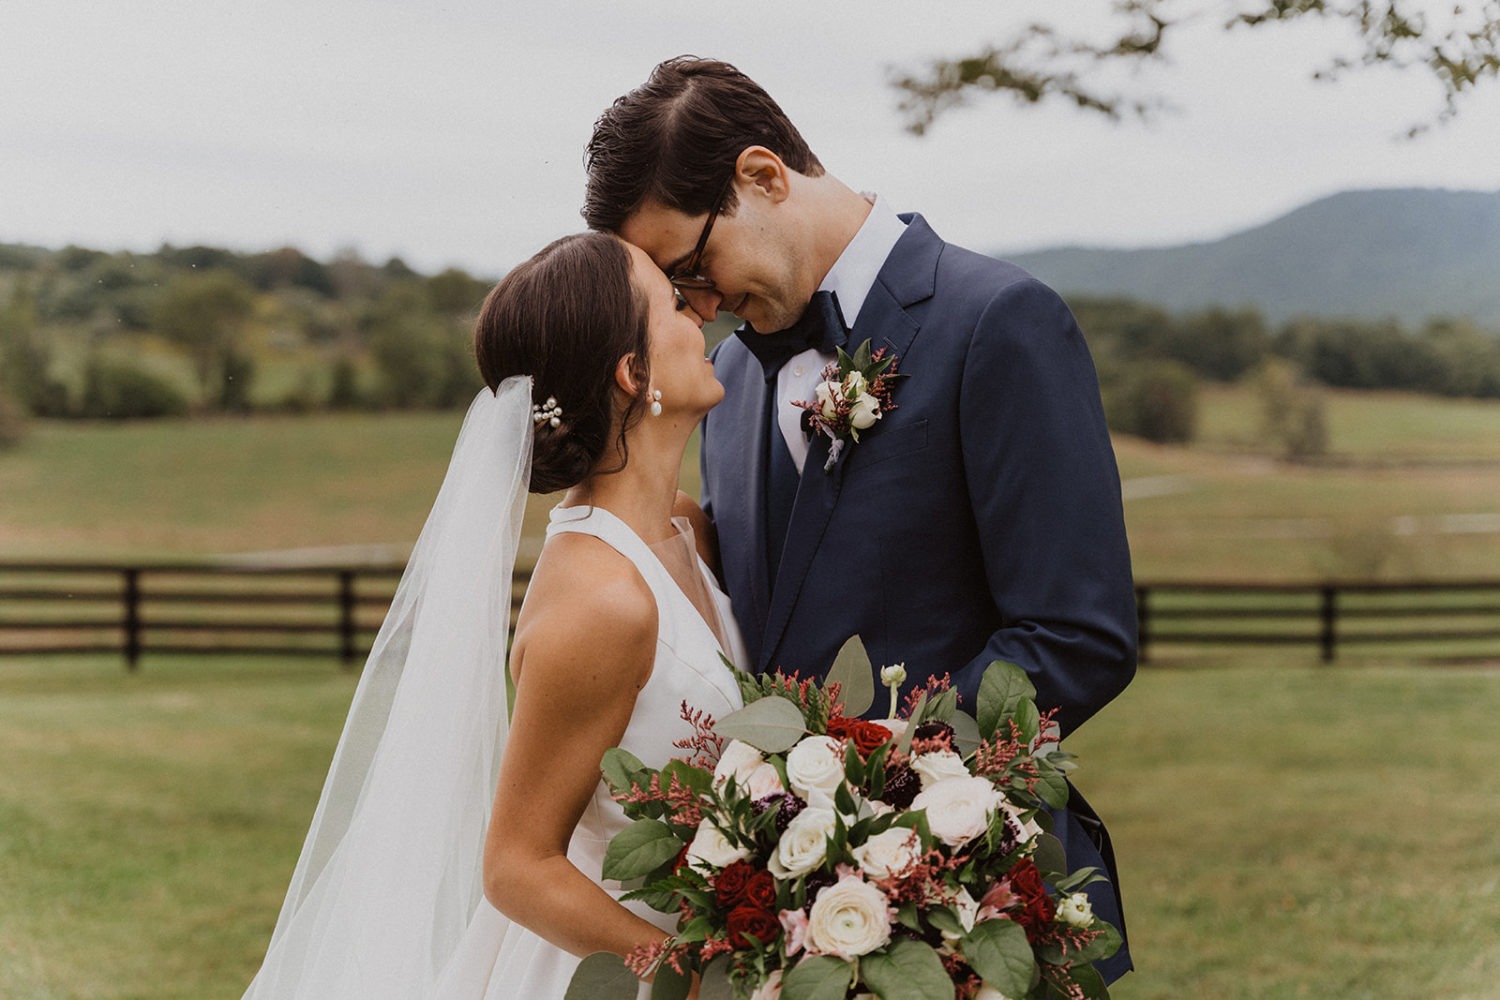 couple embraces while holding wedding bouquet at virginia wedding ranch venue